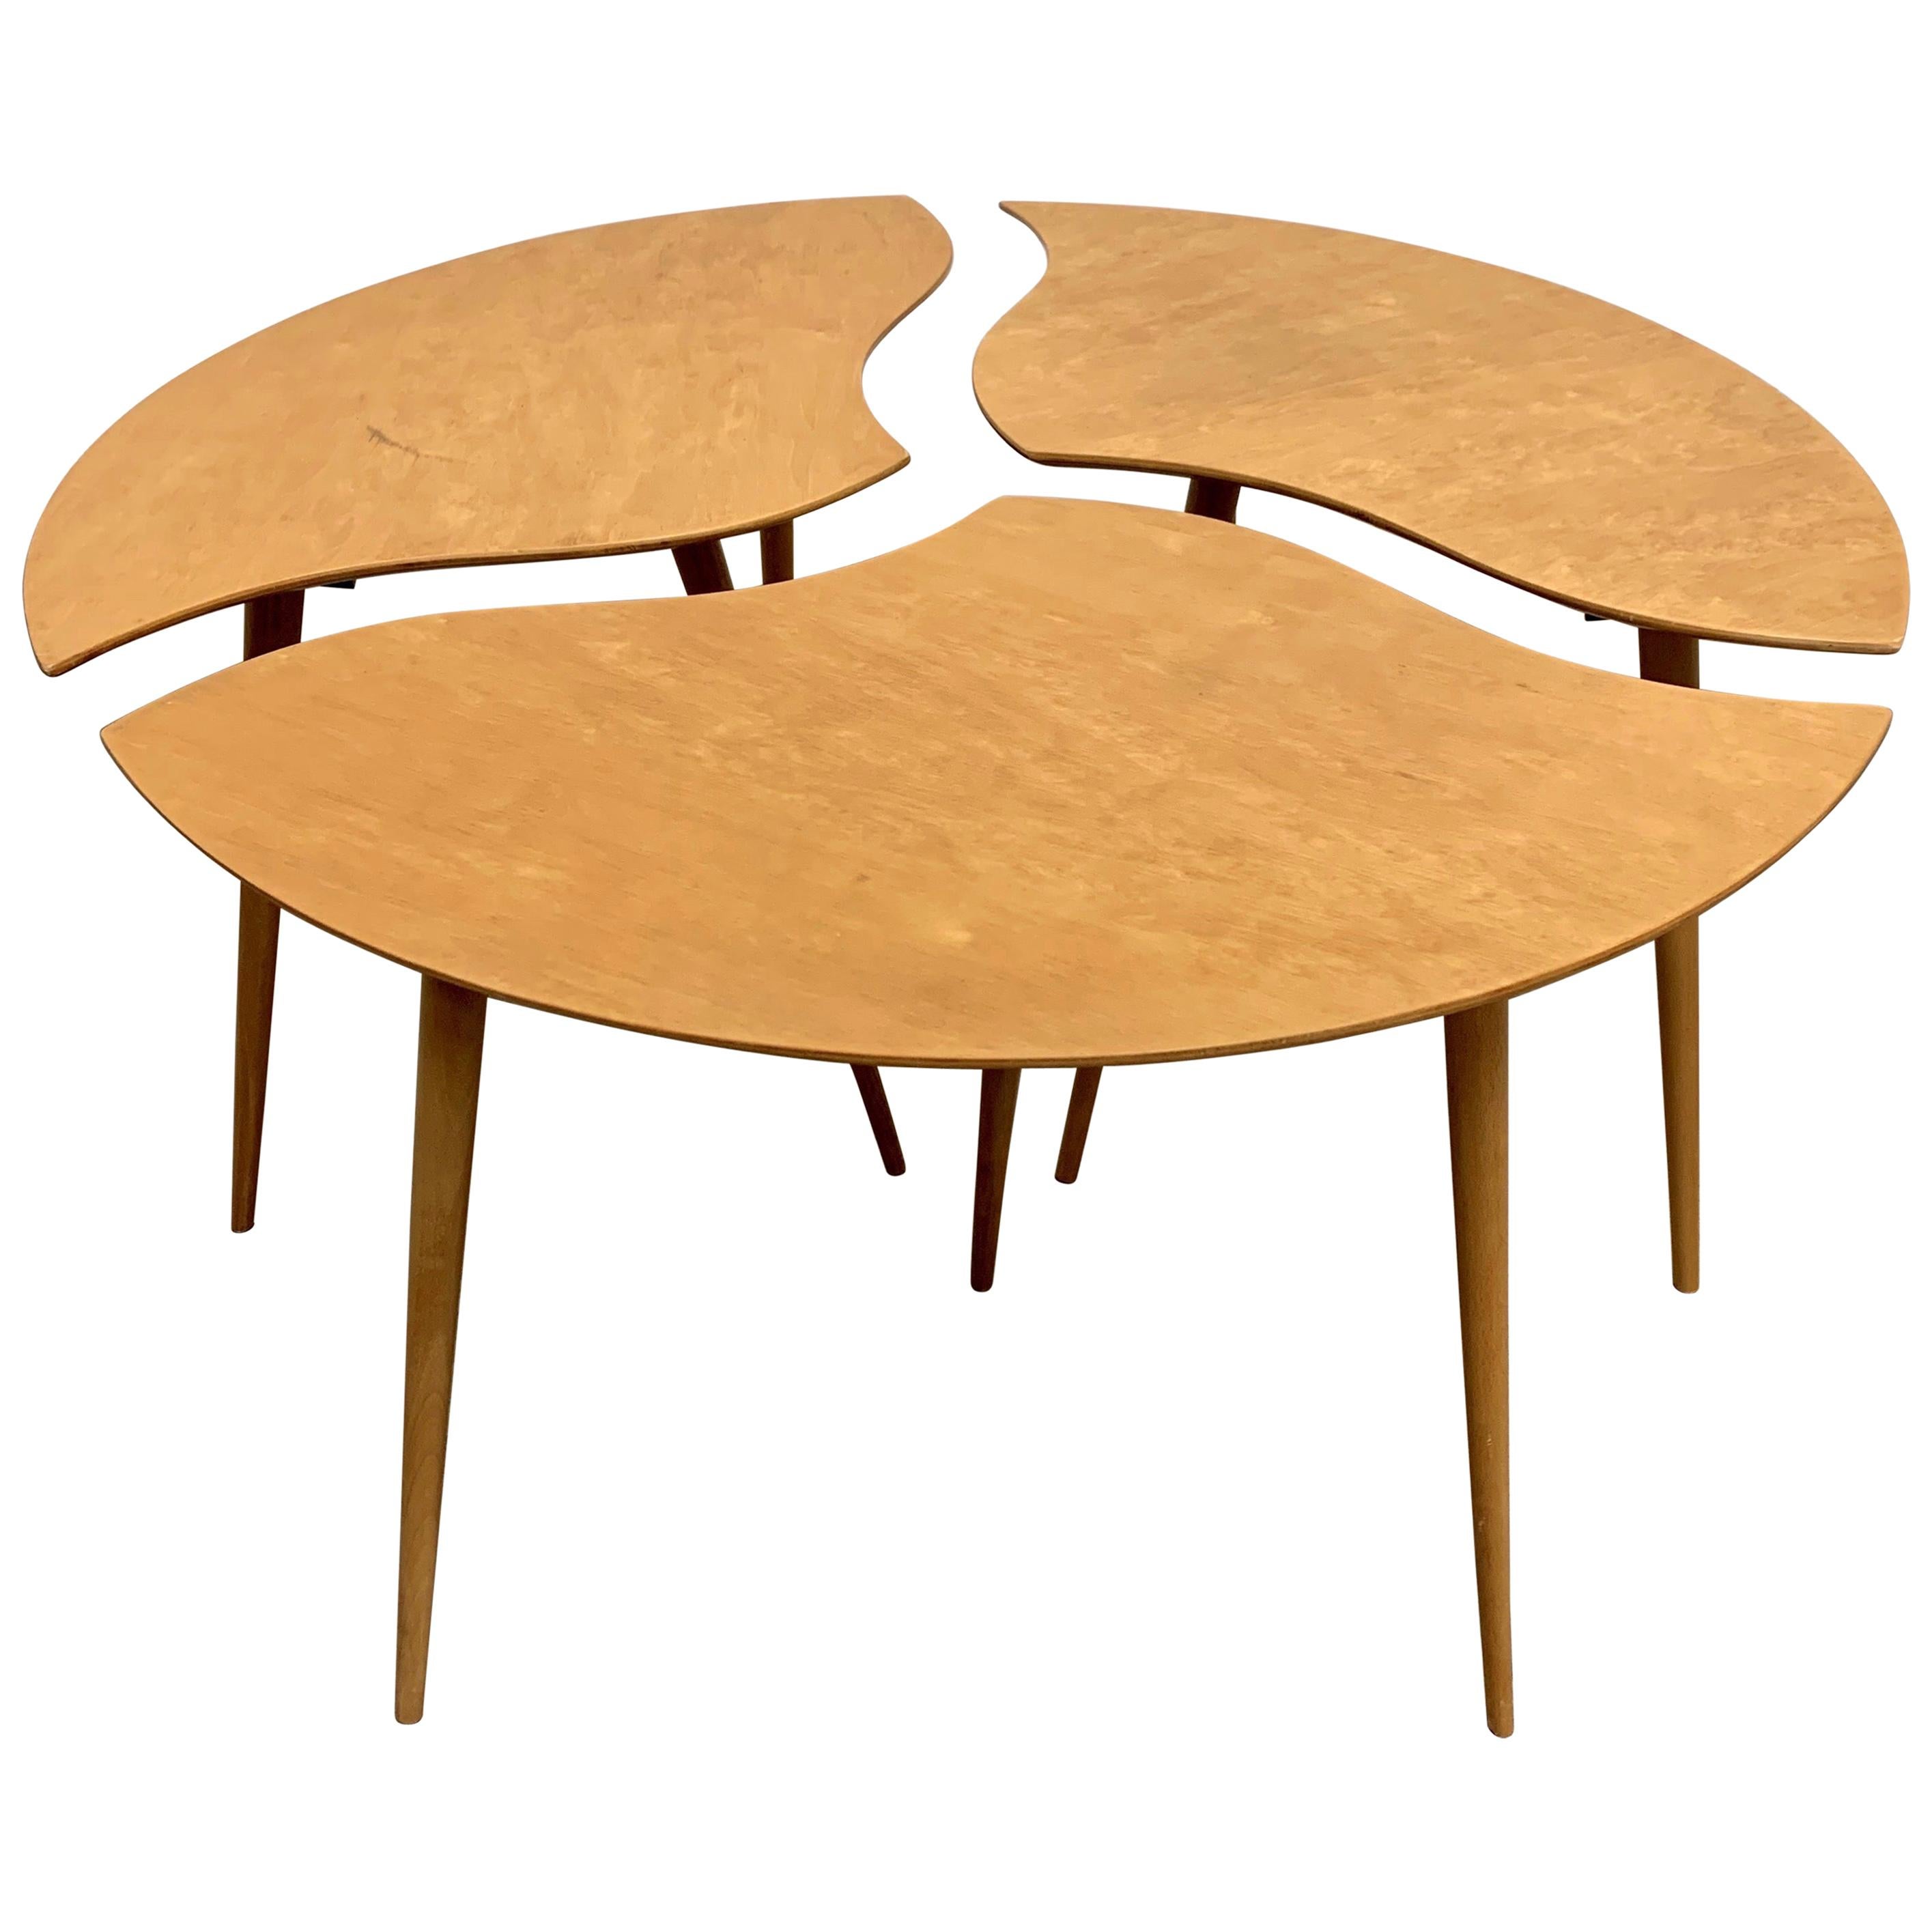 Swedish Segmented "Toothpick" Table For Sale